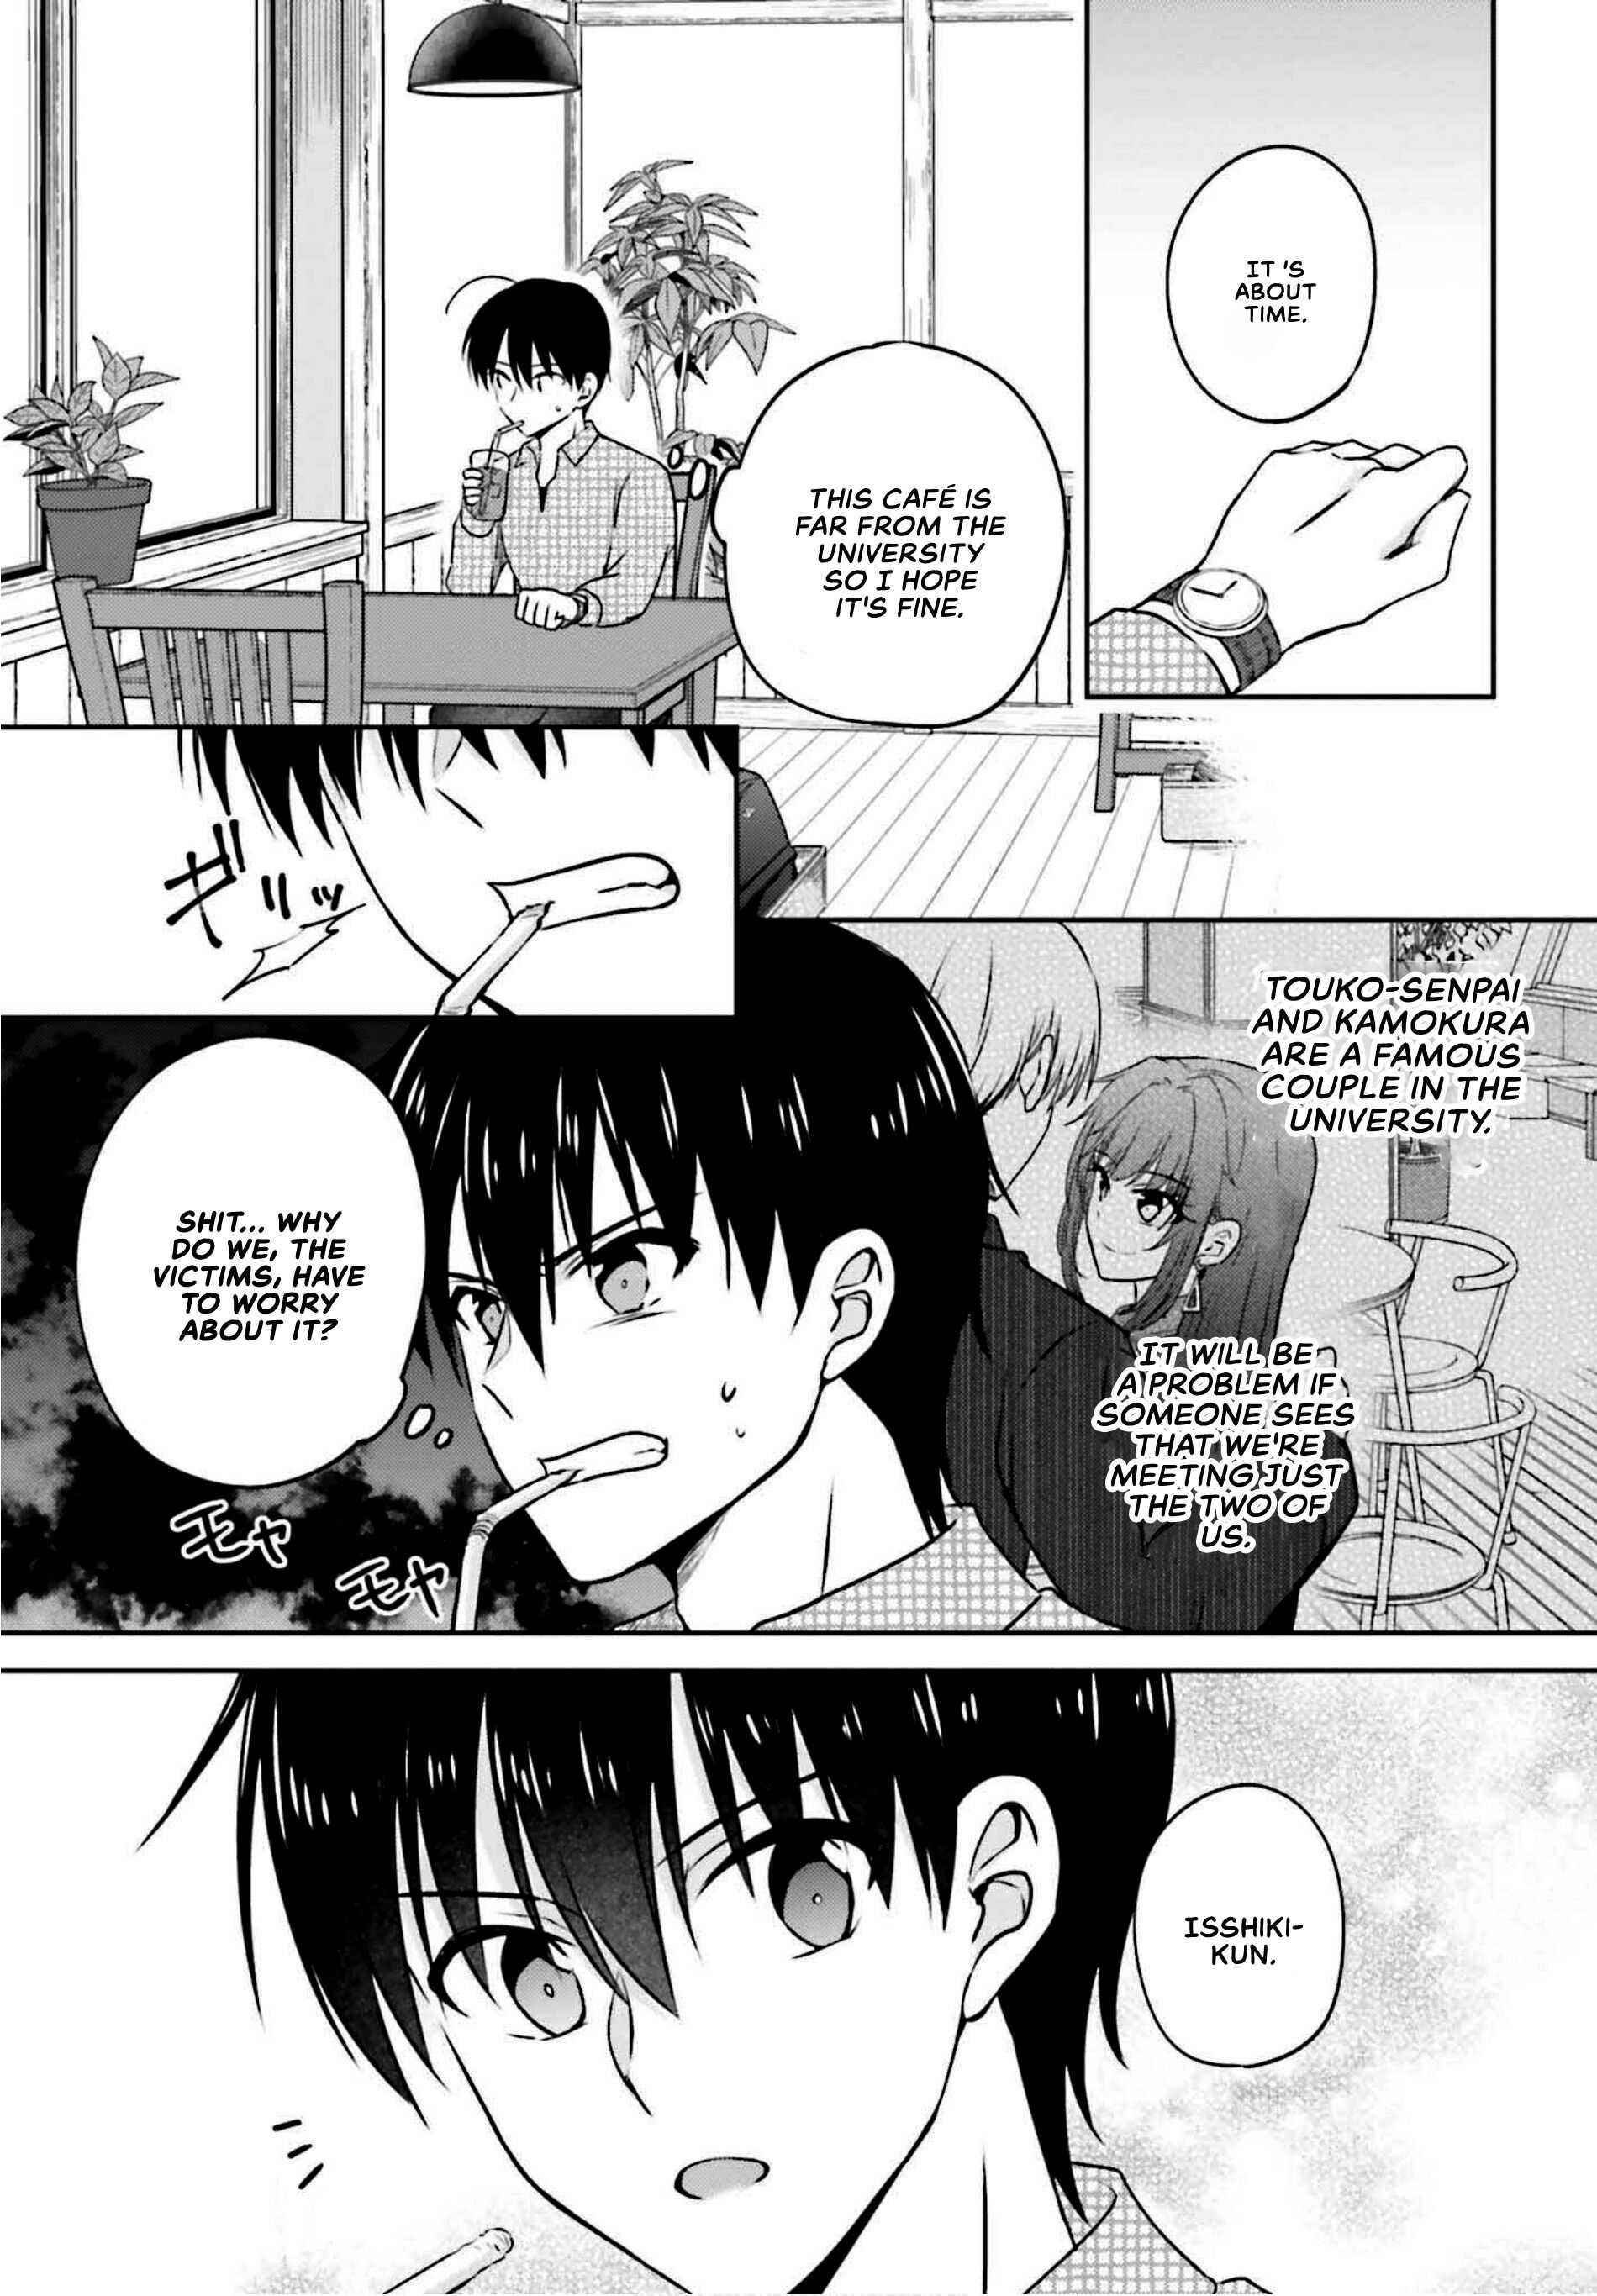 Read Manga My Girlfriend Cheated on Me With a Senior, so I’m Cheating ...